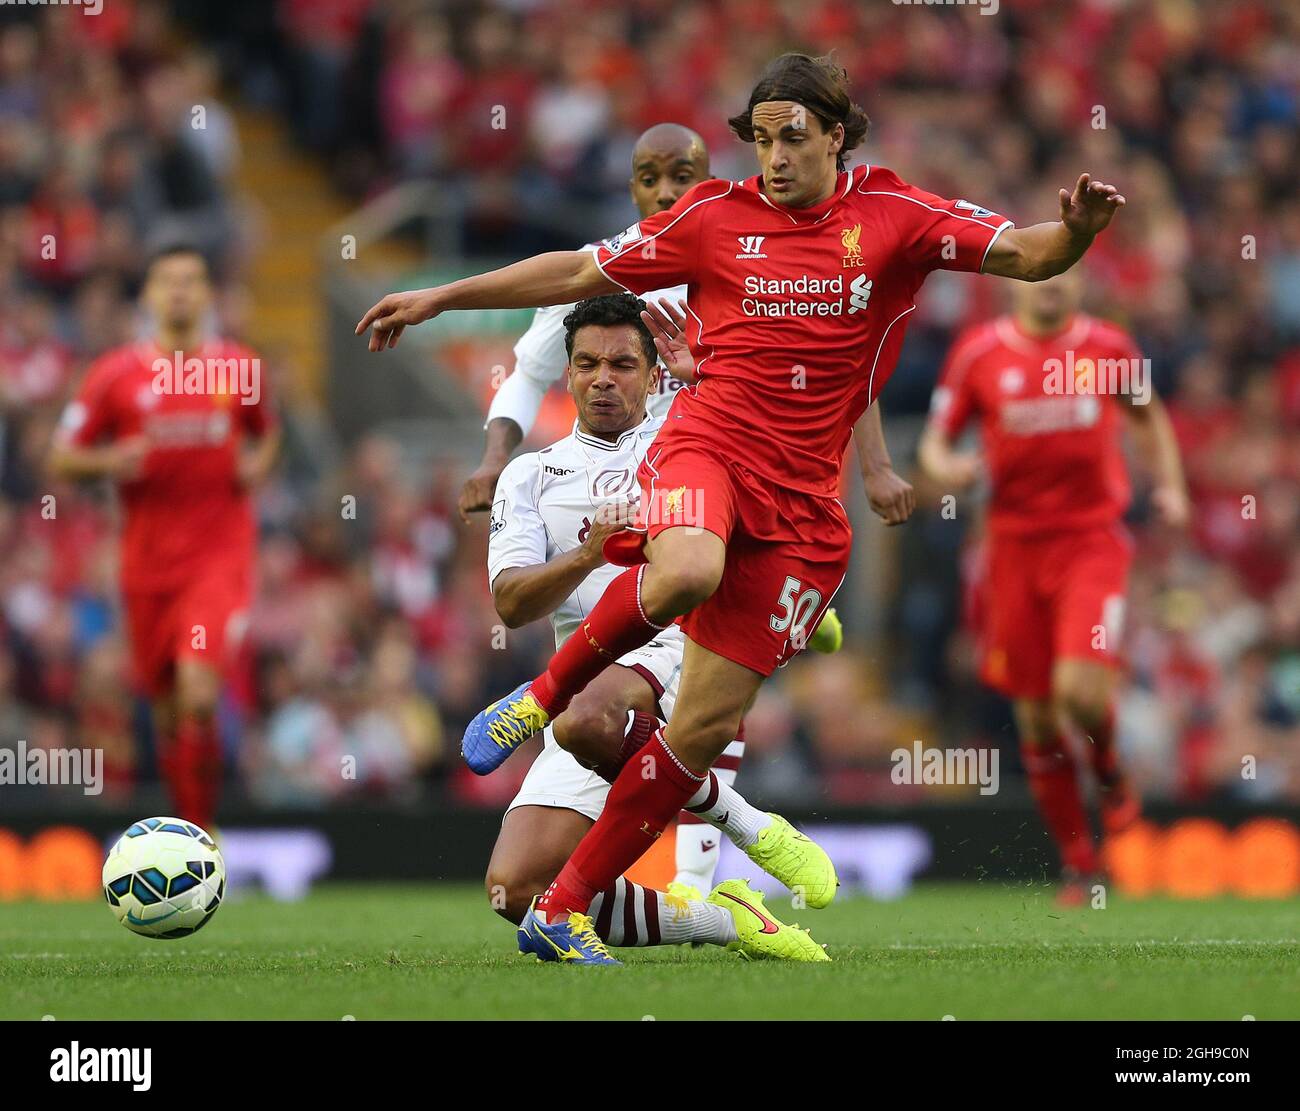 Lazar Markovic of Liverpool tackled by Kieran Richardson of Aston Villa during their English Premier League soccer match at Anfield in Liverpool, northern England September 13, 2014. Stock Photo